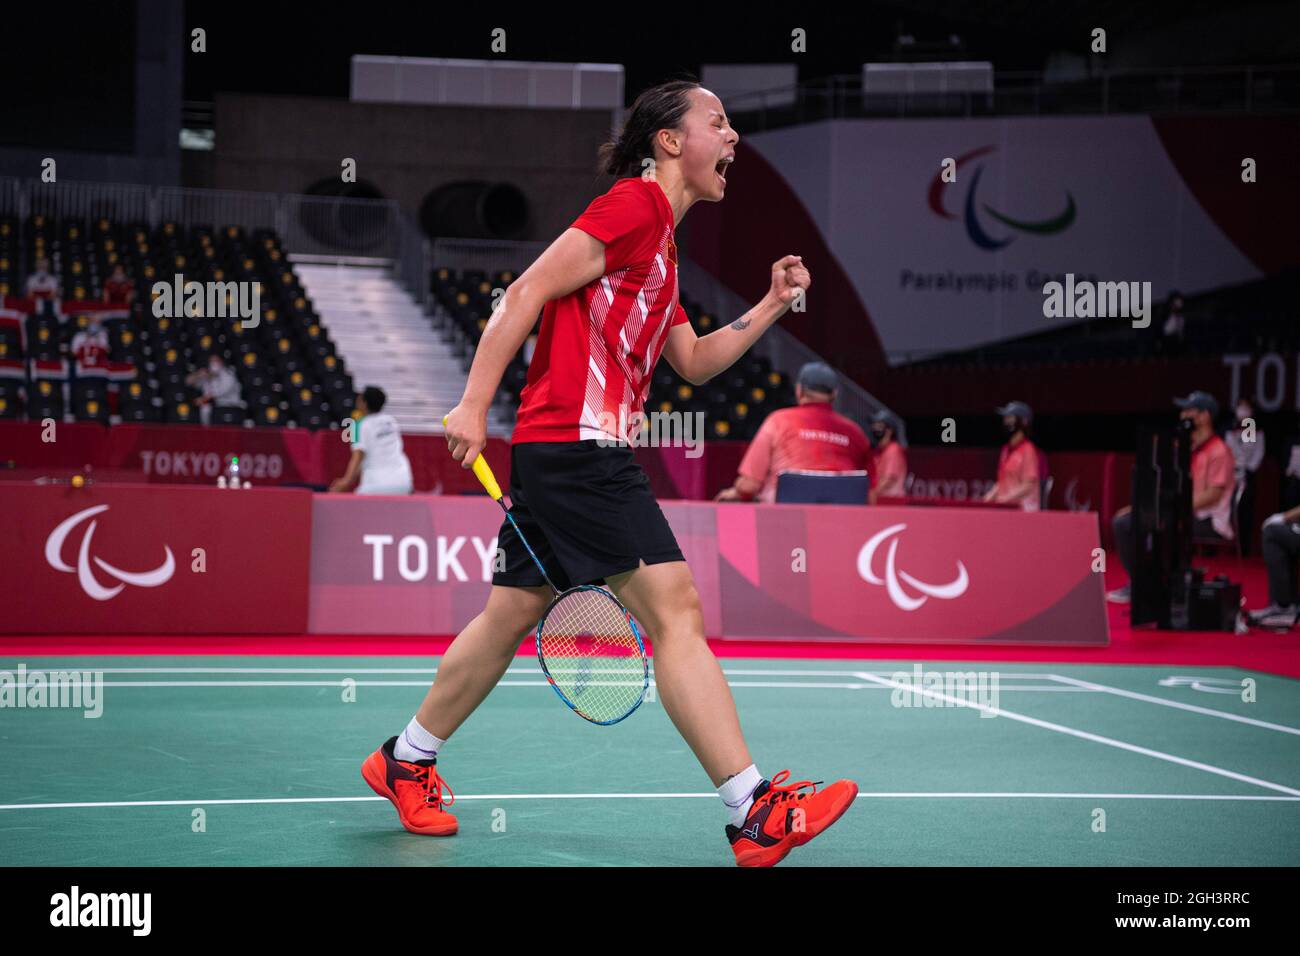 Tokyo, Japan. 5th Sep, 2021. Cheng Hefang of China celebrates during the women's singles SL4 gold medal match against Oktila Leani Ratri of Indonesia at the badminton event of the Tokyo 2020 Paralympic Games in Tokyo, Japan, Sept. 5, 2021. Credit: Cheong Kam Ka/Xinhua/Alamy Live News Stock Photo